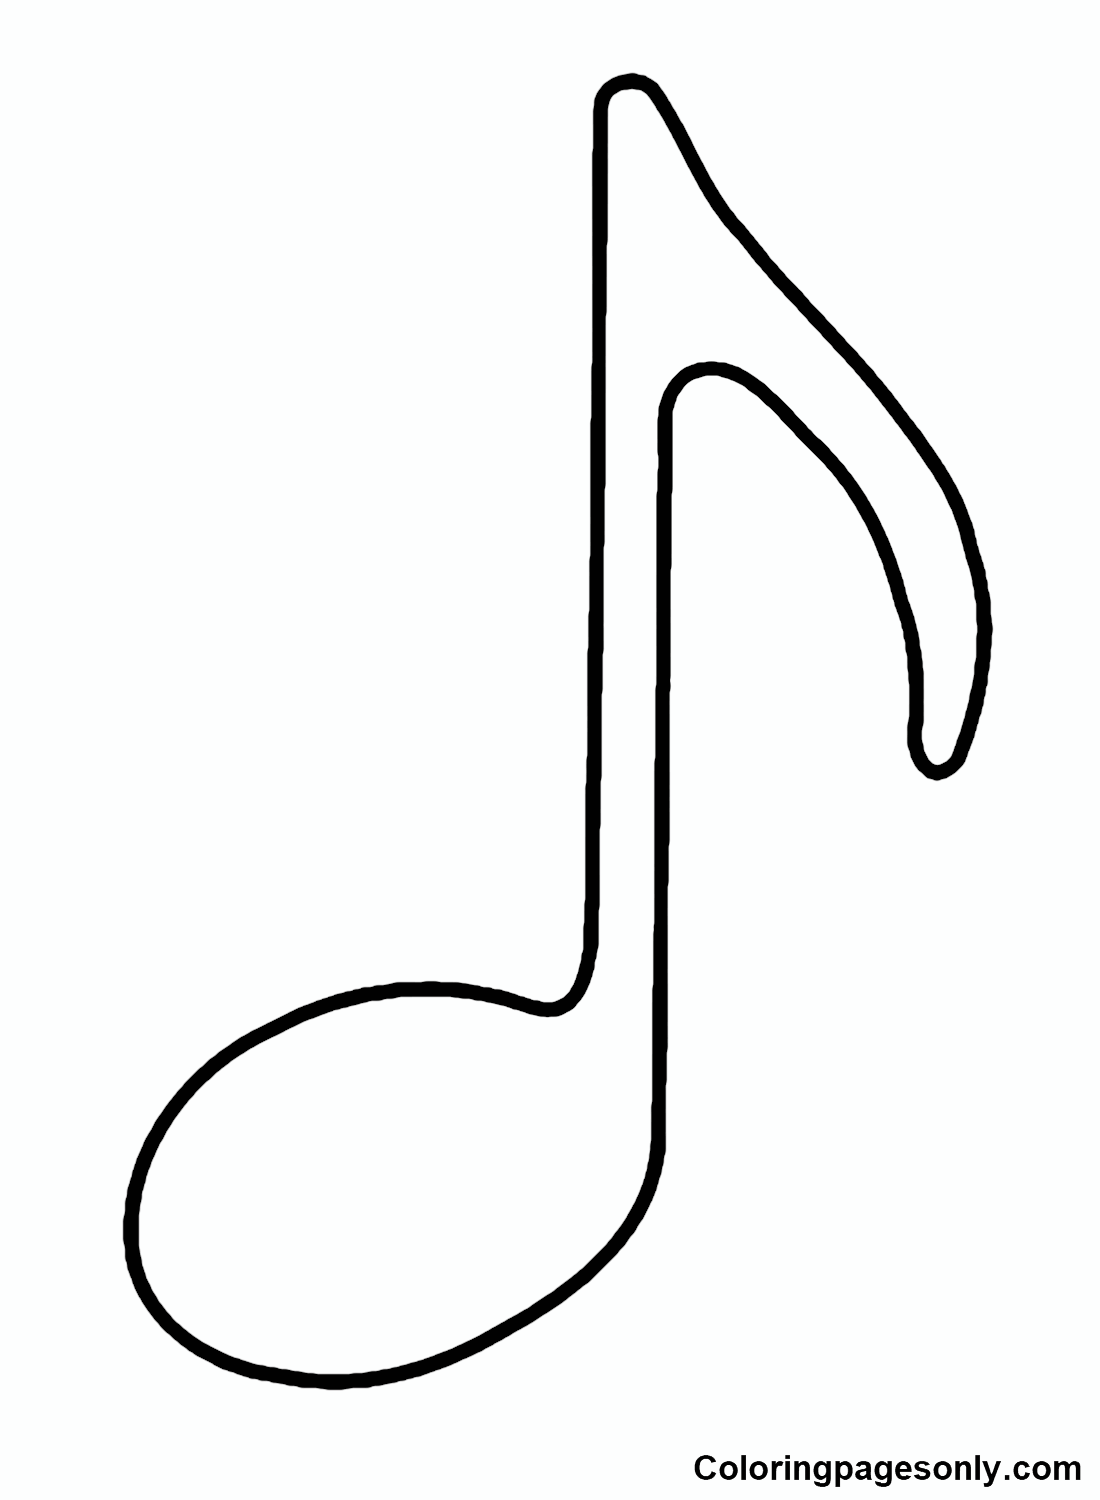 Music notes coloring pages printable for free download